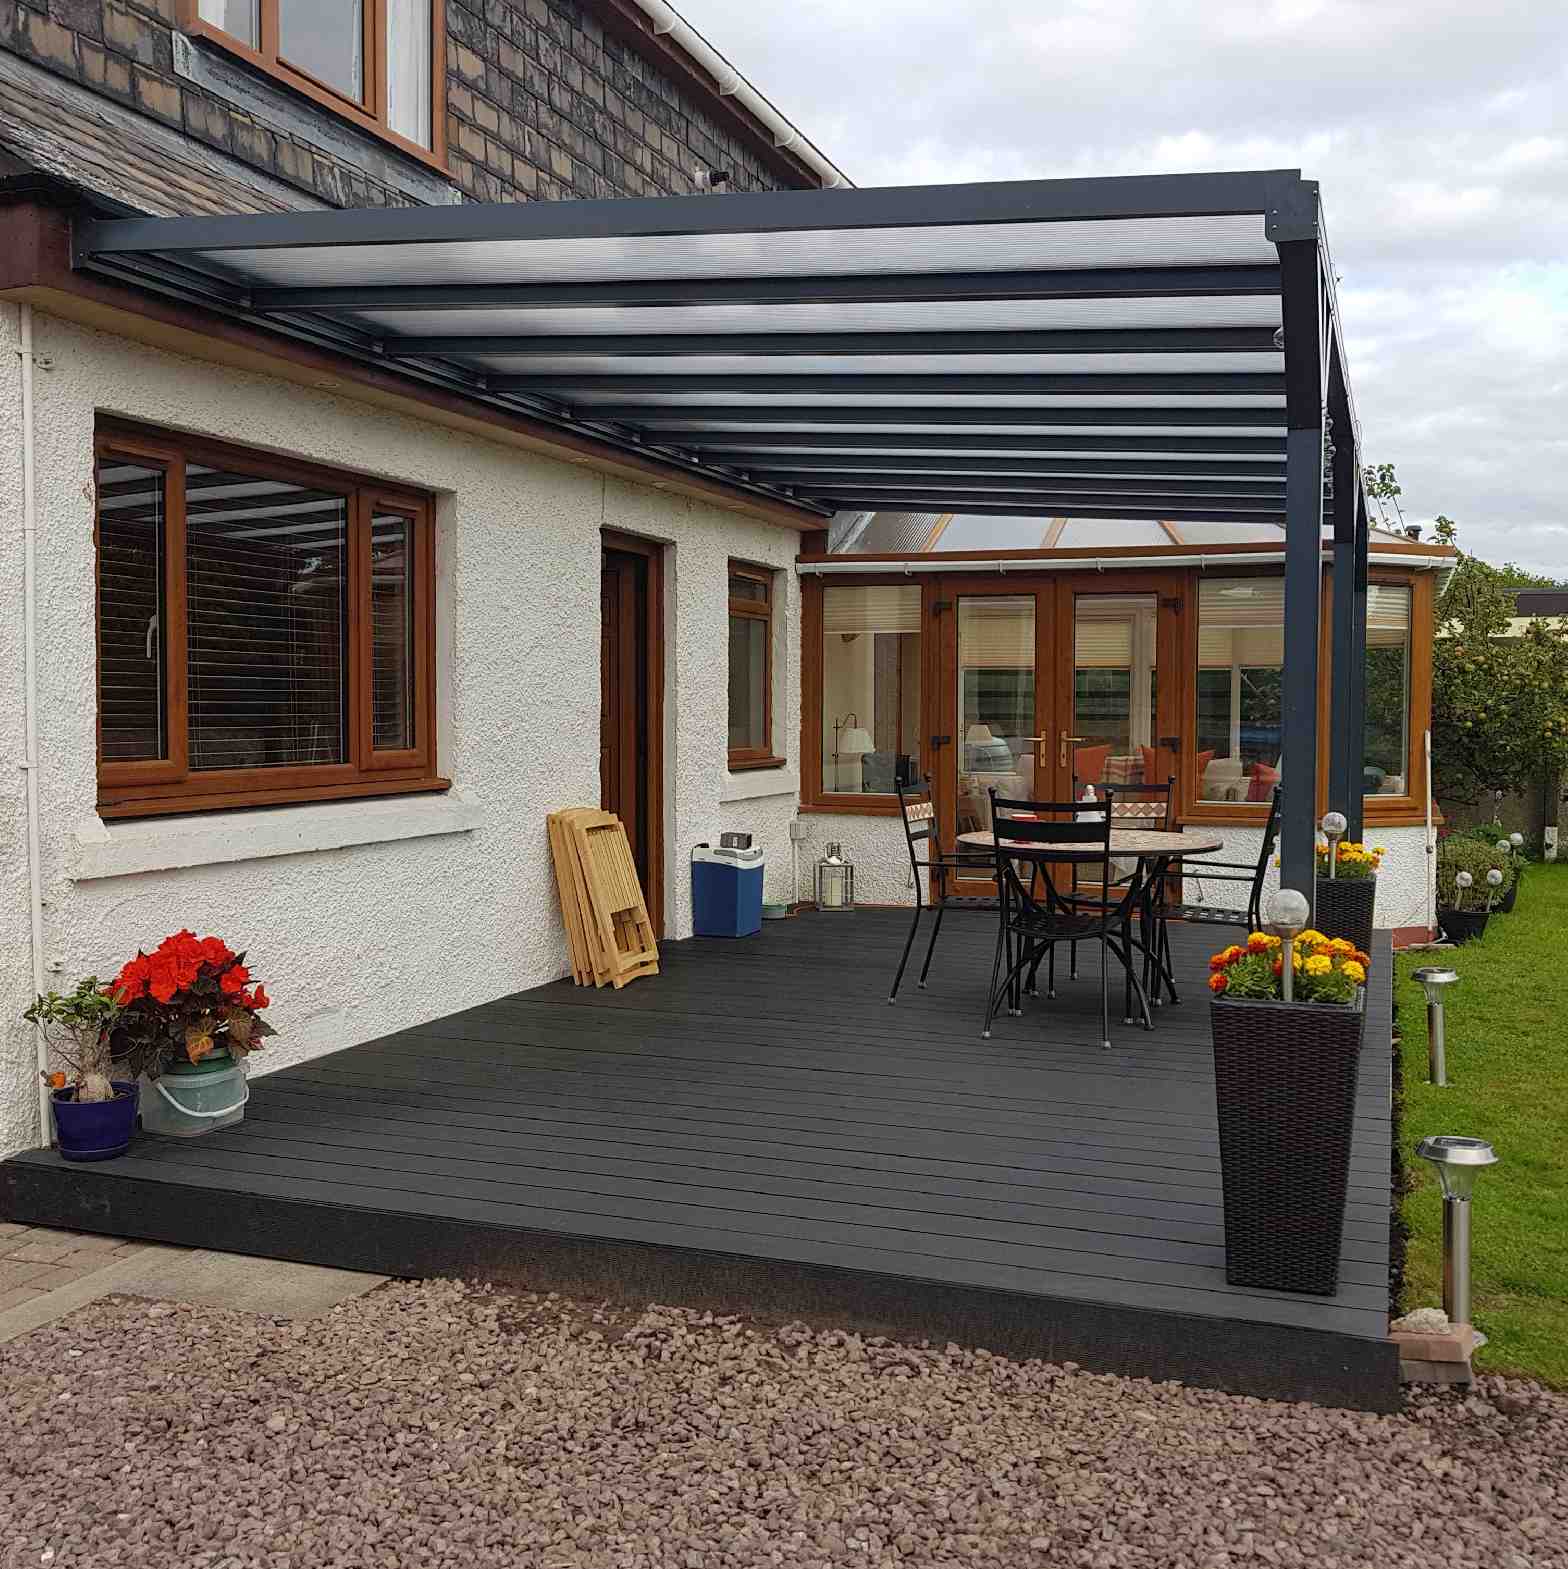 Buy Omega Verandah, Anthracite Grey, 16mm Polycarbonate Glazing - 6.0m (W) x 1.5m (P), (3) Supporting Posts online today